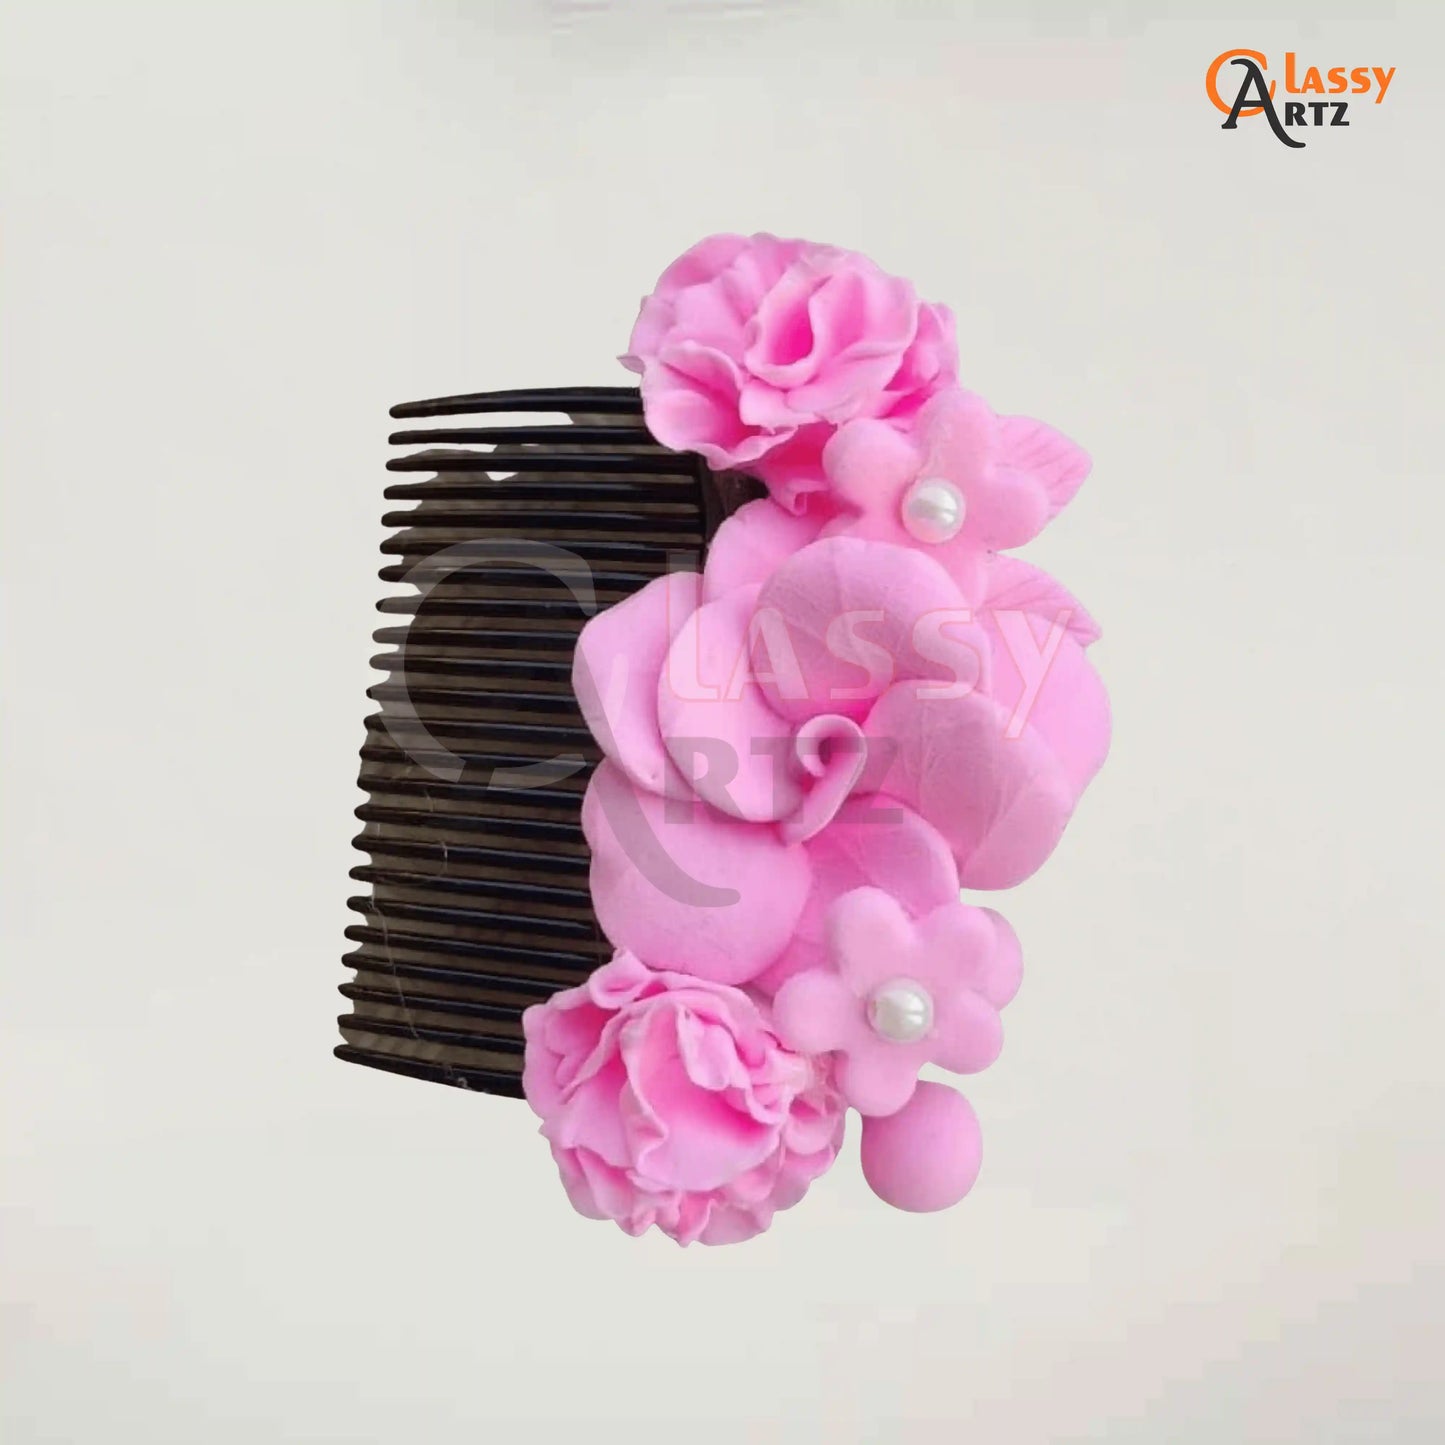 Fancy Set Of 3 Clay Flowers Hair Clips For Party